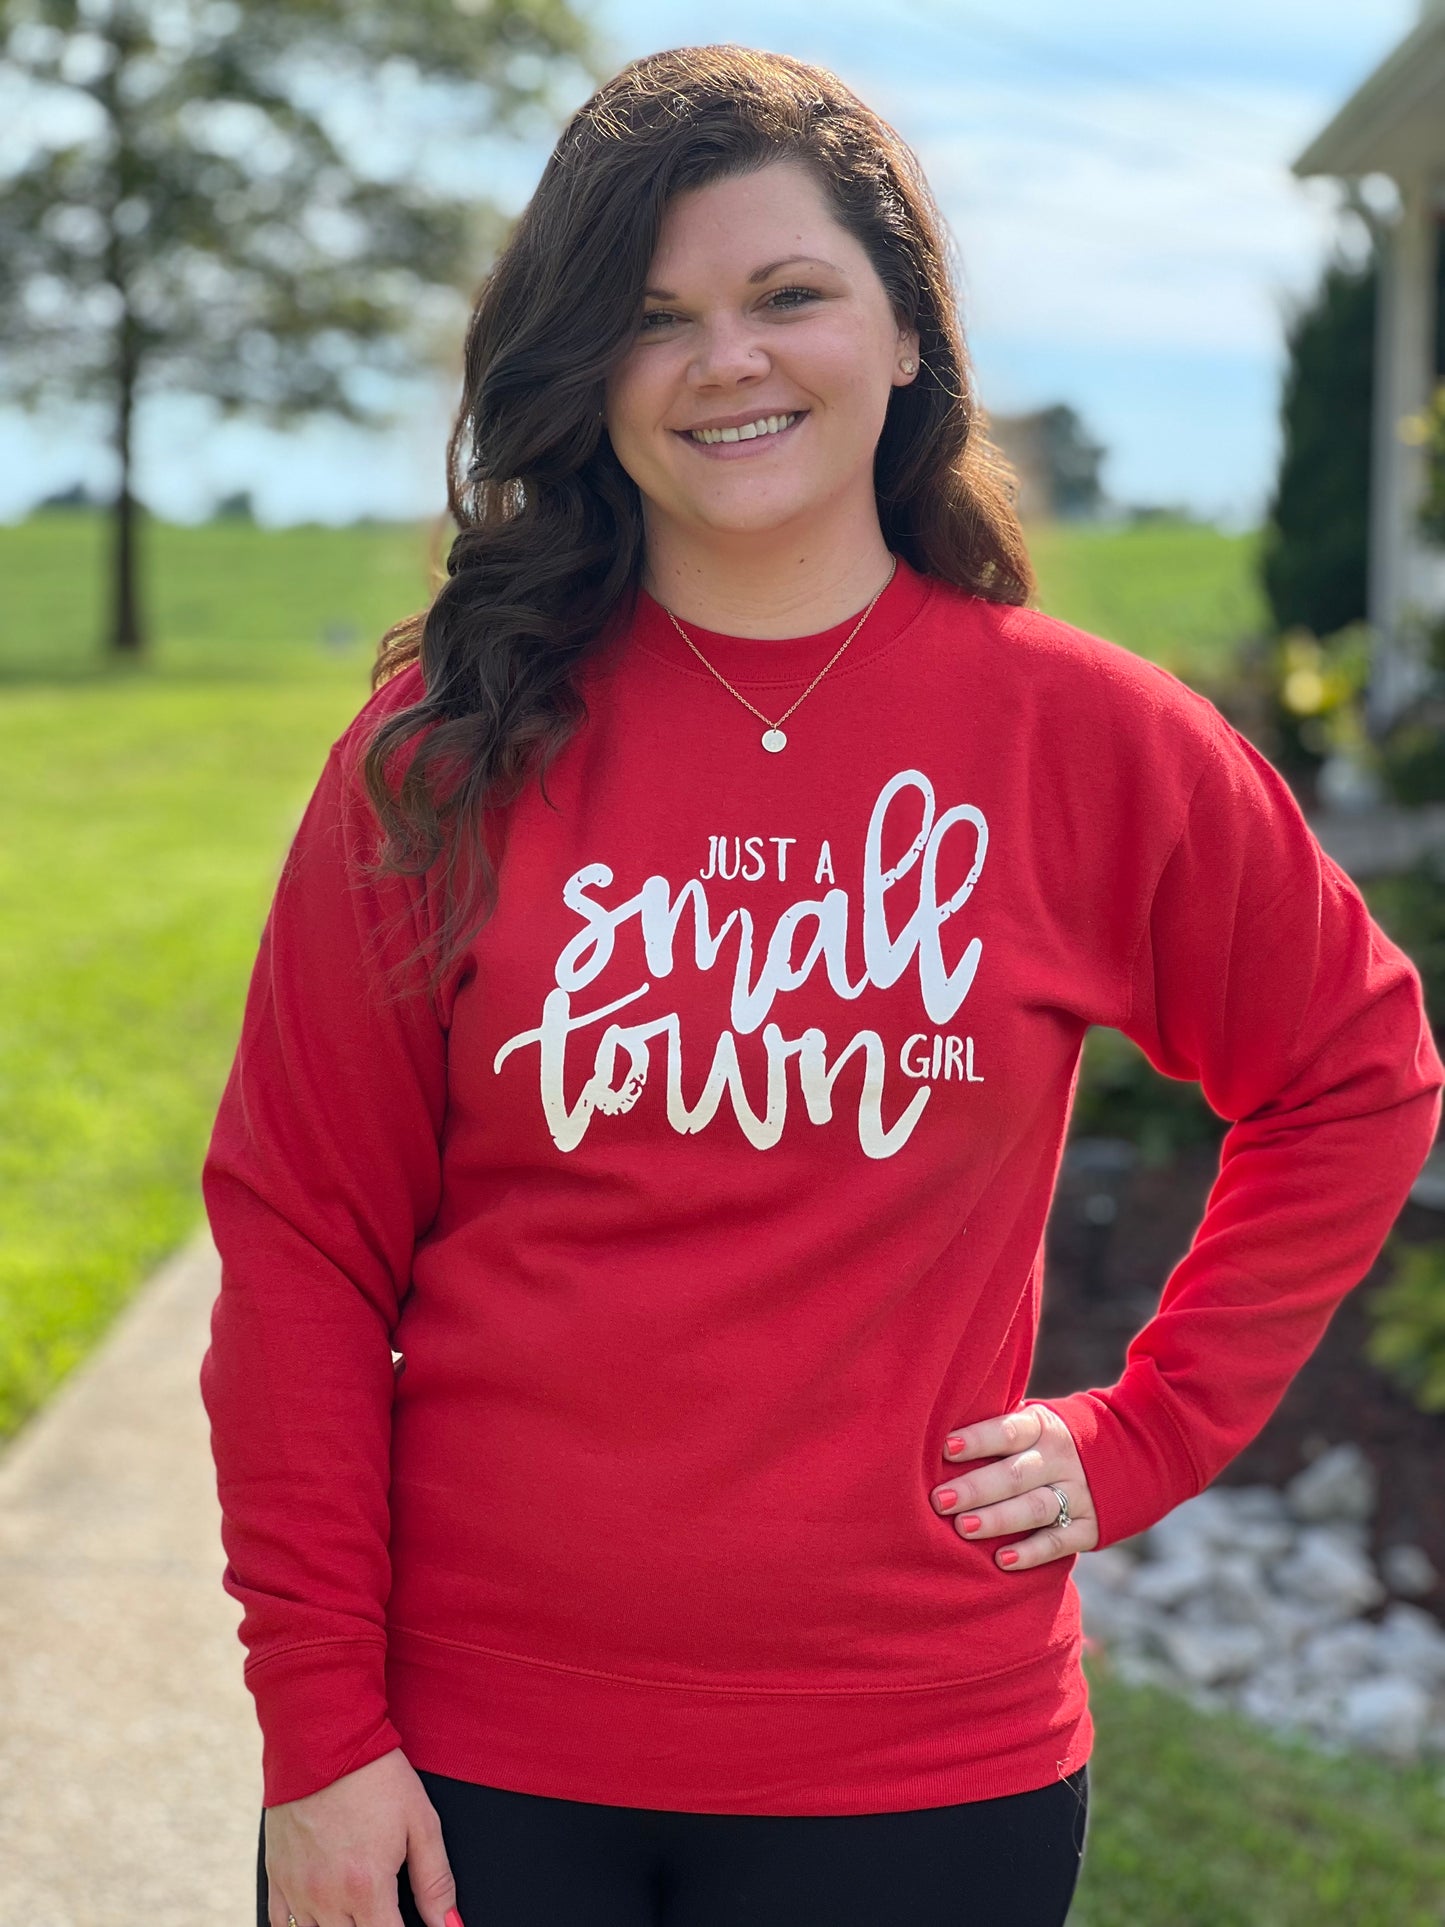 “Just a Small Town Girl” Sweatshirt